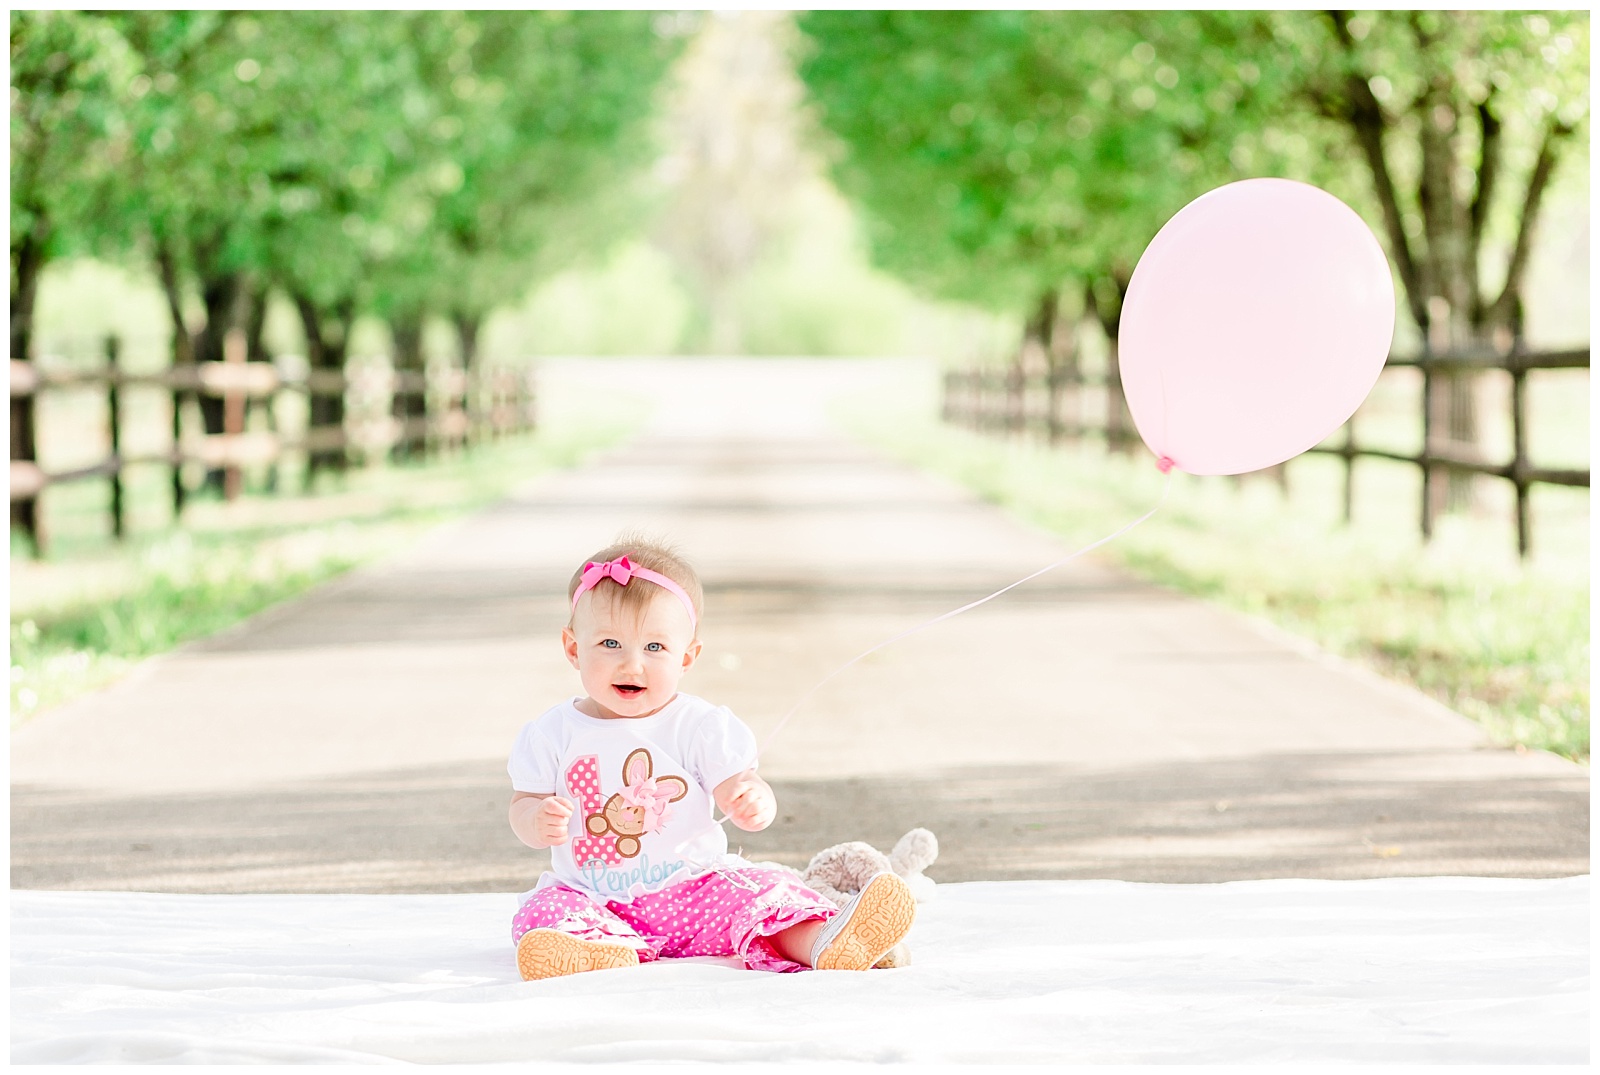 Spring One Year Old Birthday Session for Baby Girl with Different Shades of Pink